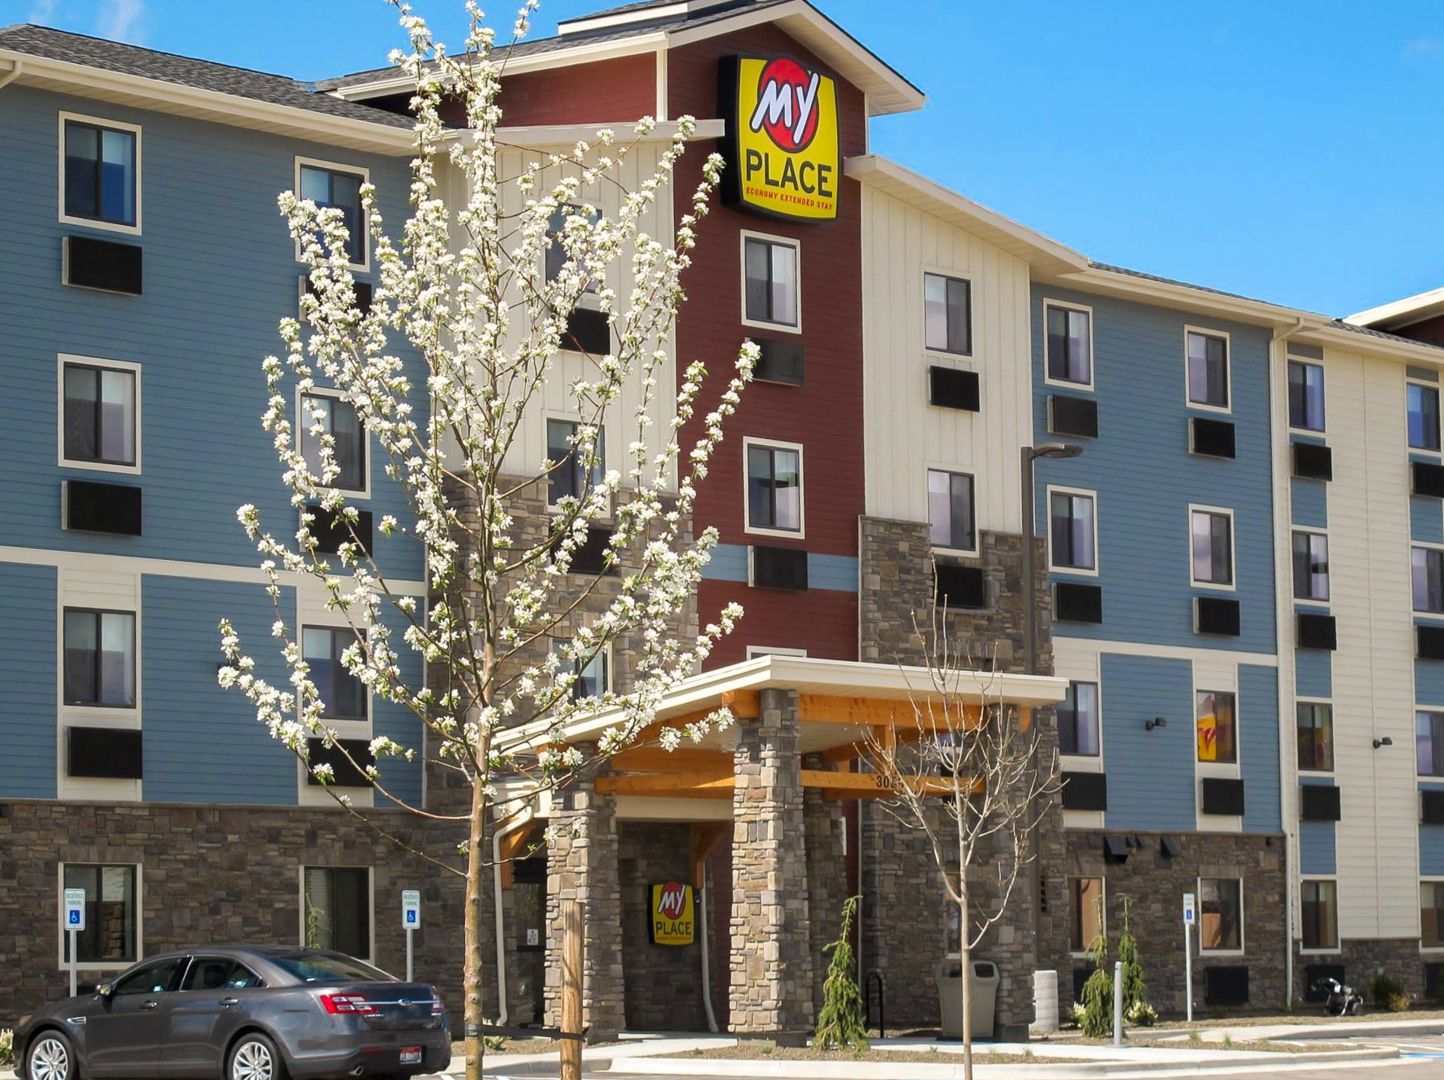 Photo of My Place Hotel Meridian, Meridian, ID